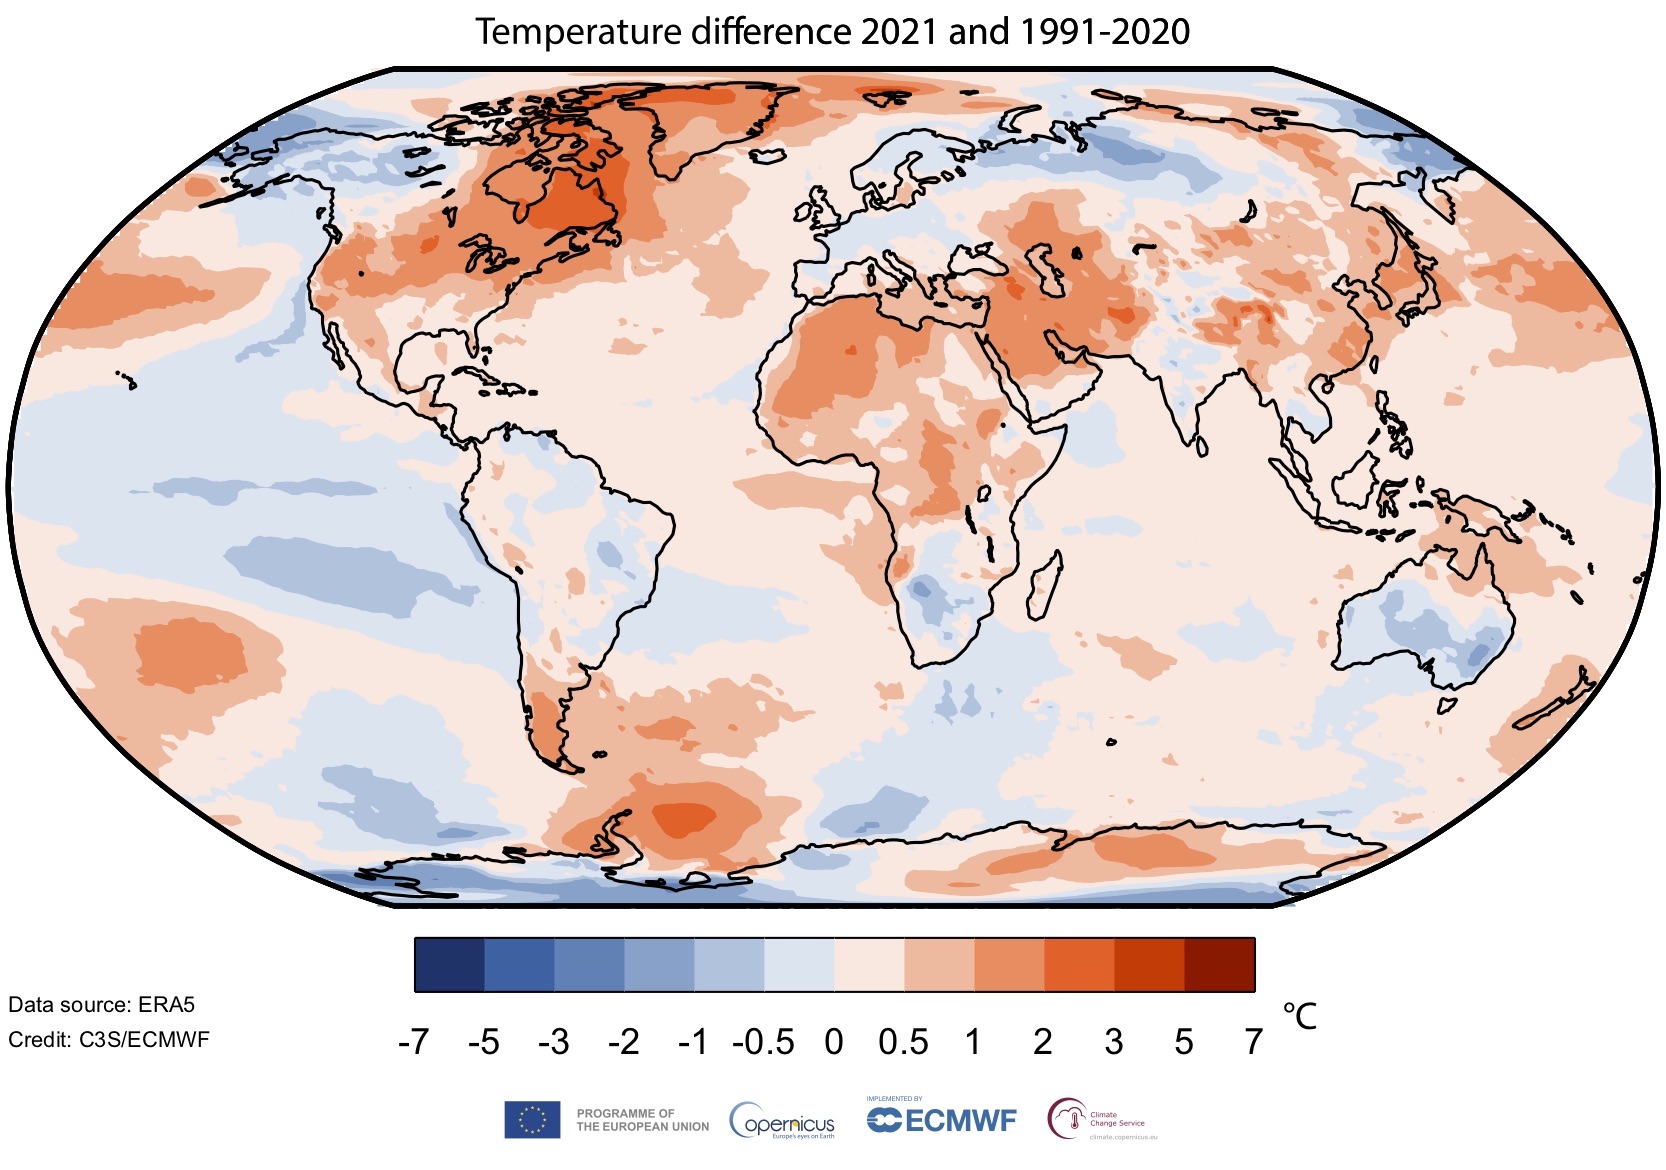 a globe with a blue-to-red temperature scale showing differences between 2021 and 1991-2020